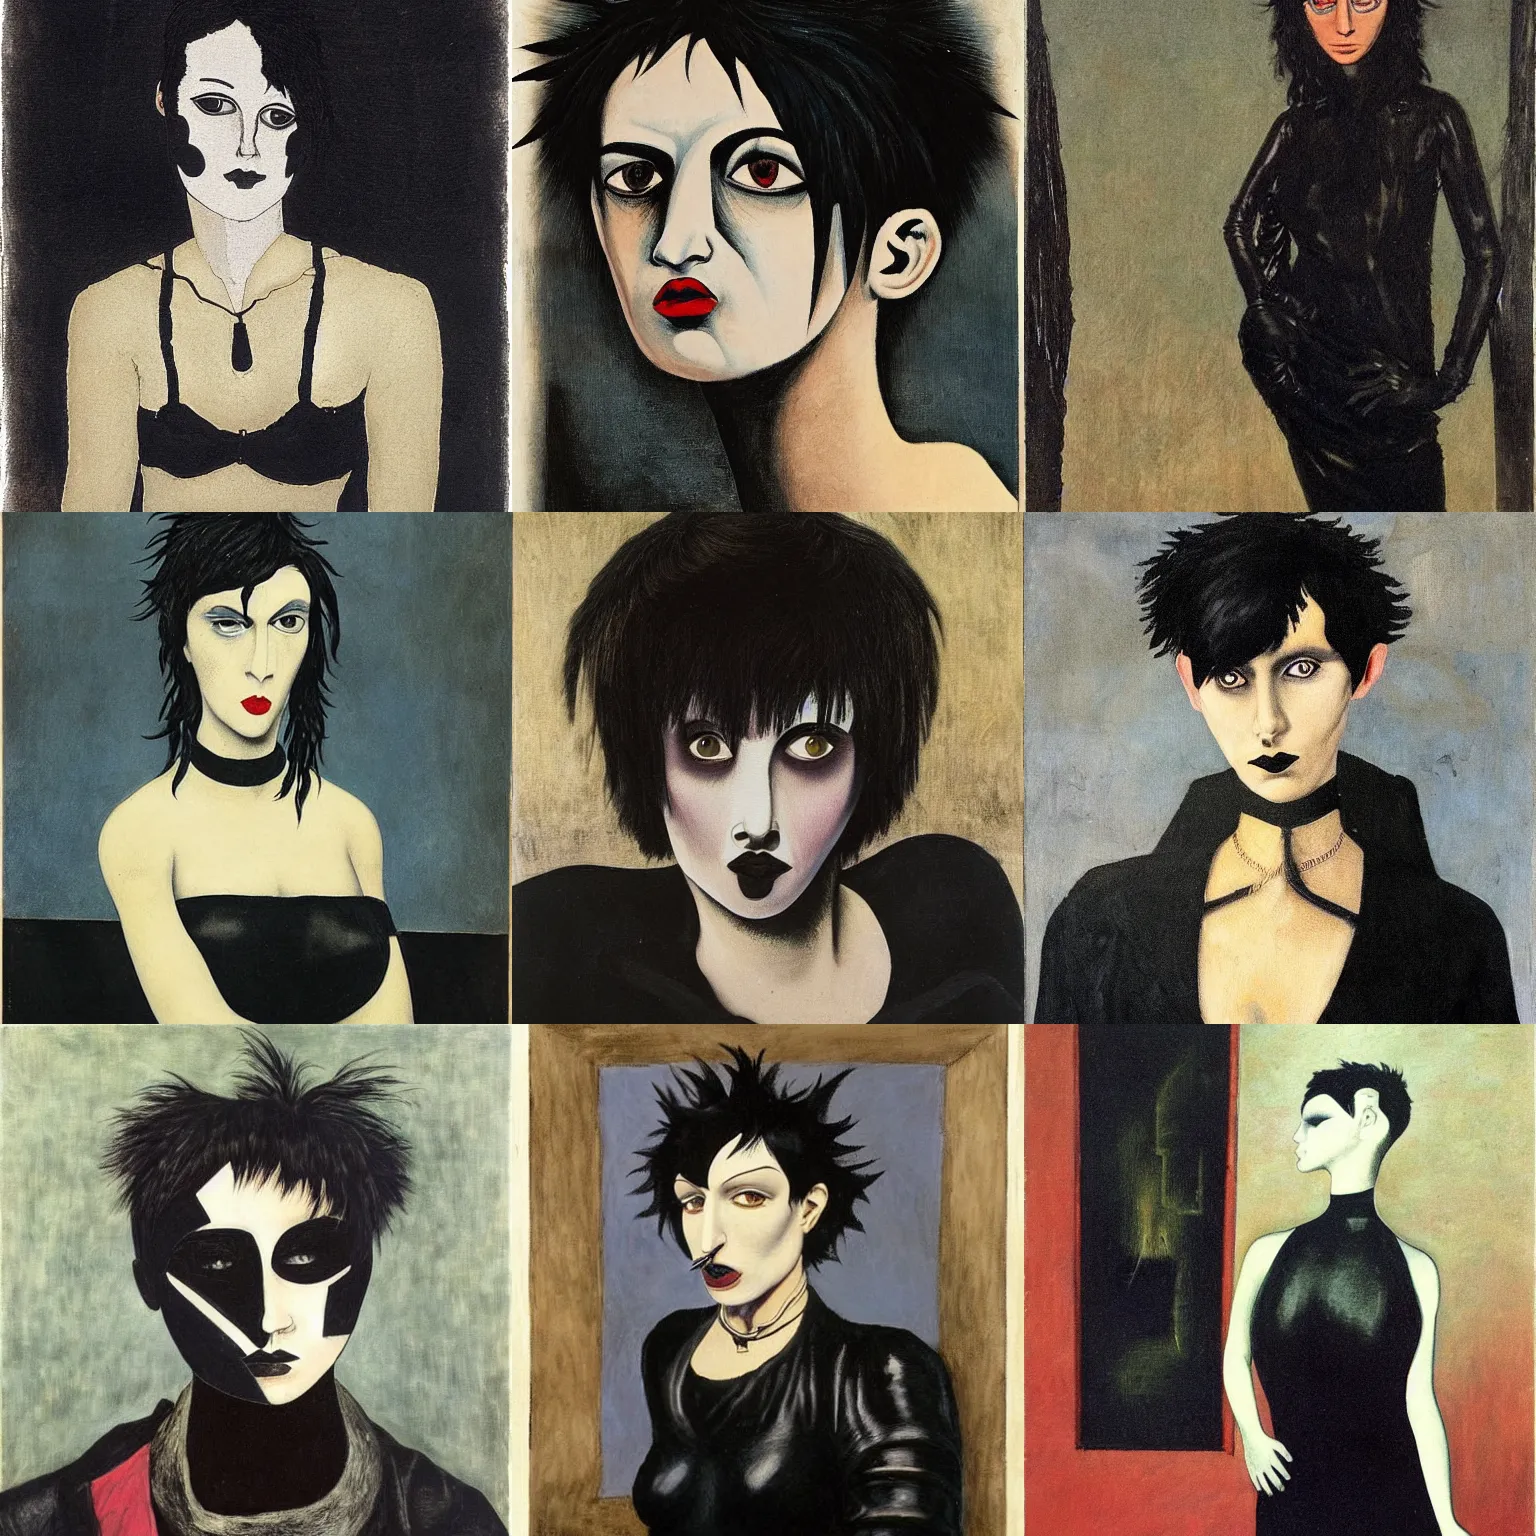 Prompt: A goth painted by Max Ernst. Her hair is dark brown and cut into a short, messy pixie cut. She has a slightly rounded face, with a pointed chin, large entirely-black eyes, and a small nose. She is wearing a black tank top, a black leather jacket, a black knee-length skirt, a black choker, and black leather boots.